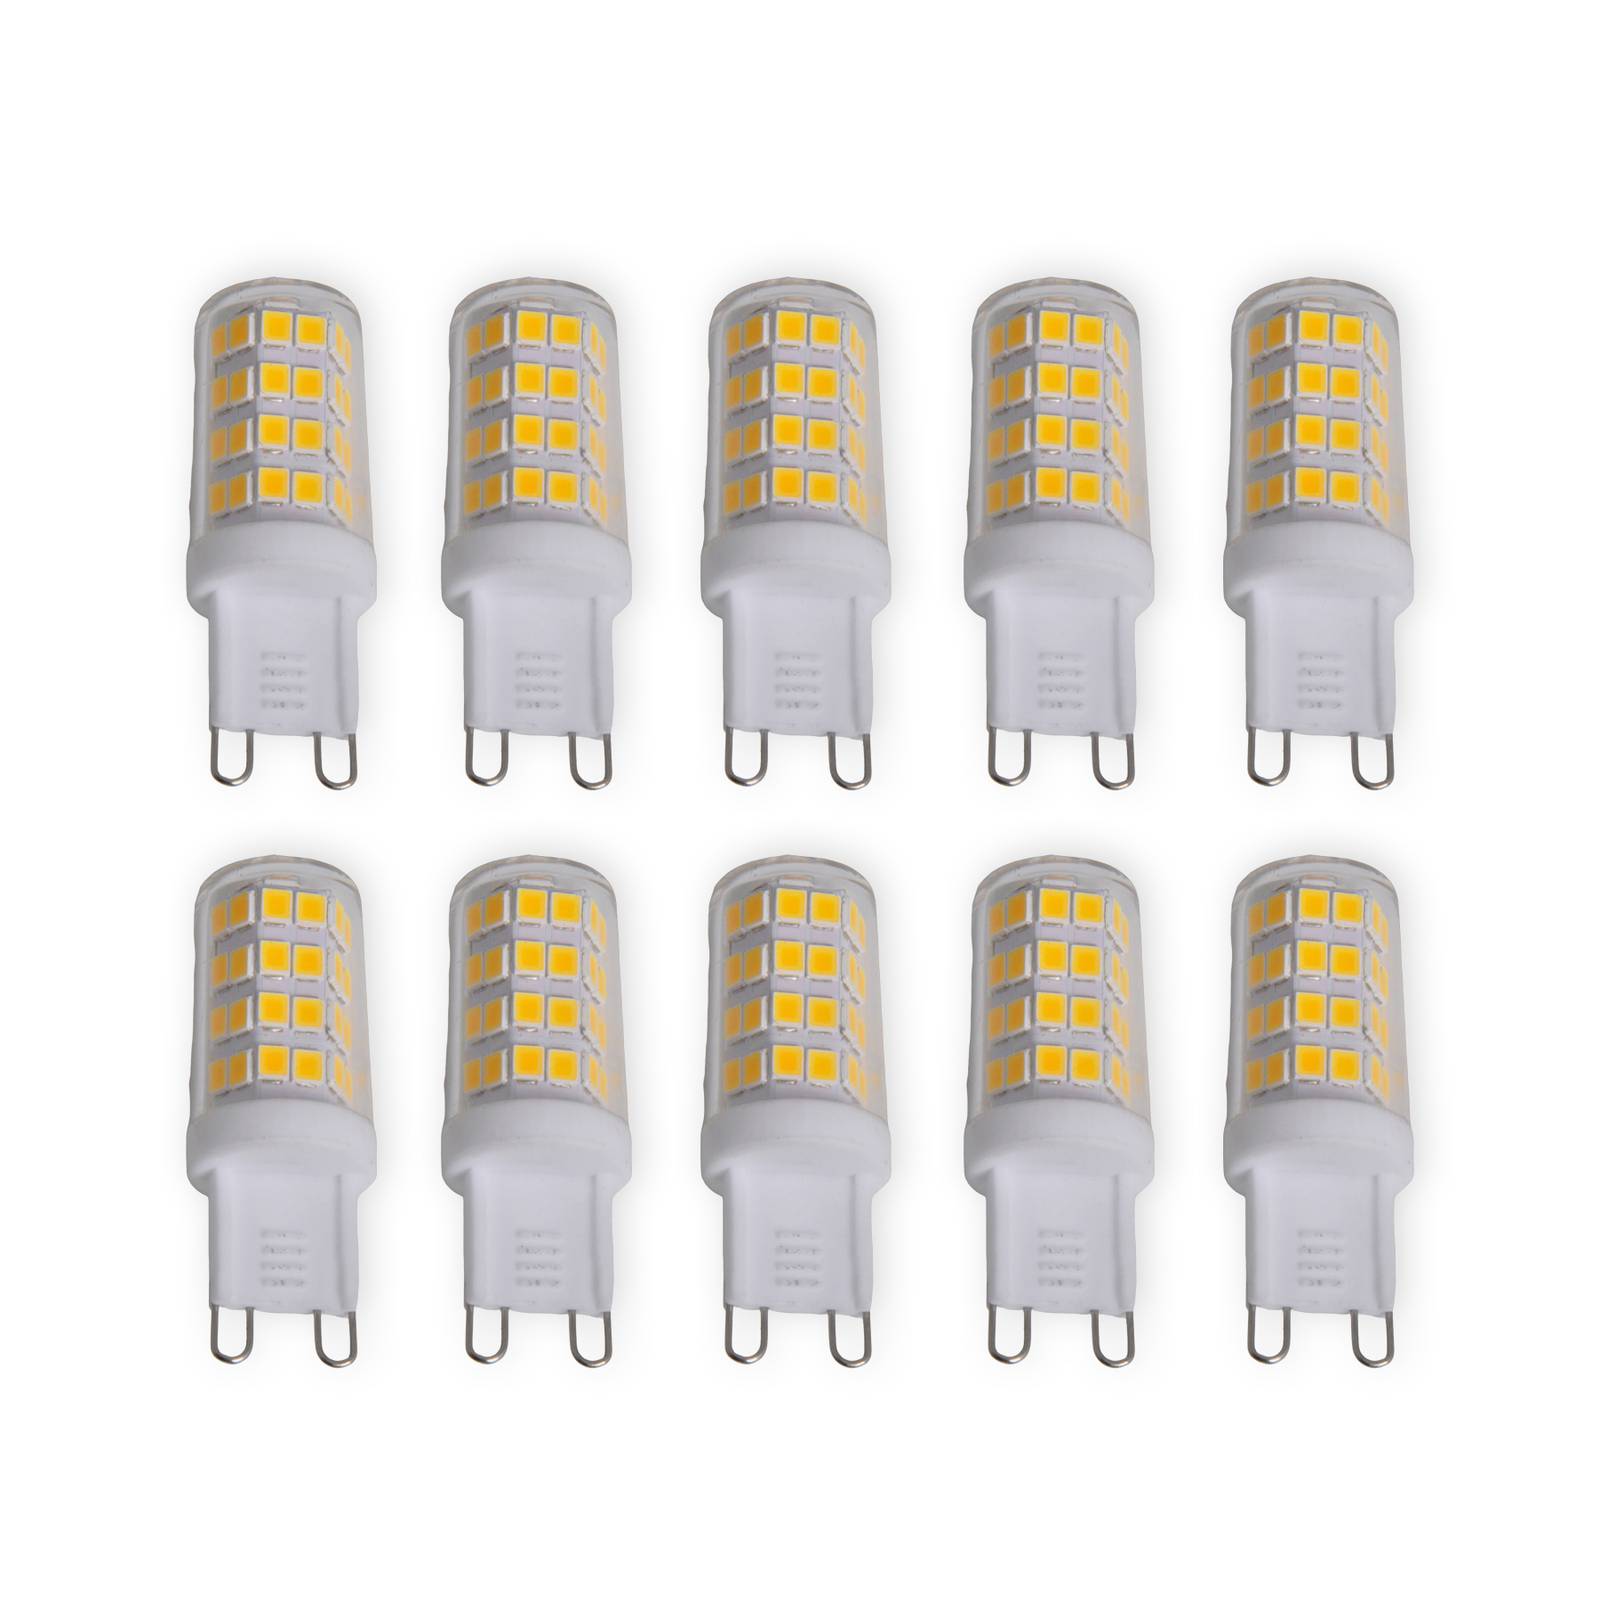 Image of Ampoule broches LED G9 3 W blanc chaud 330 lm x10 